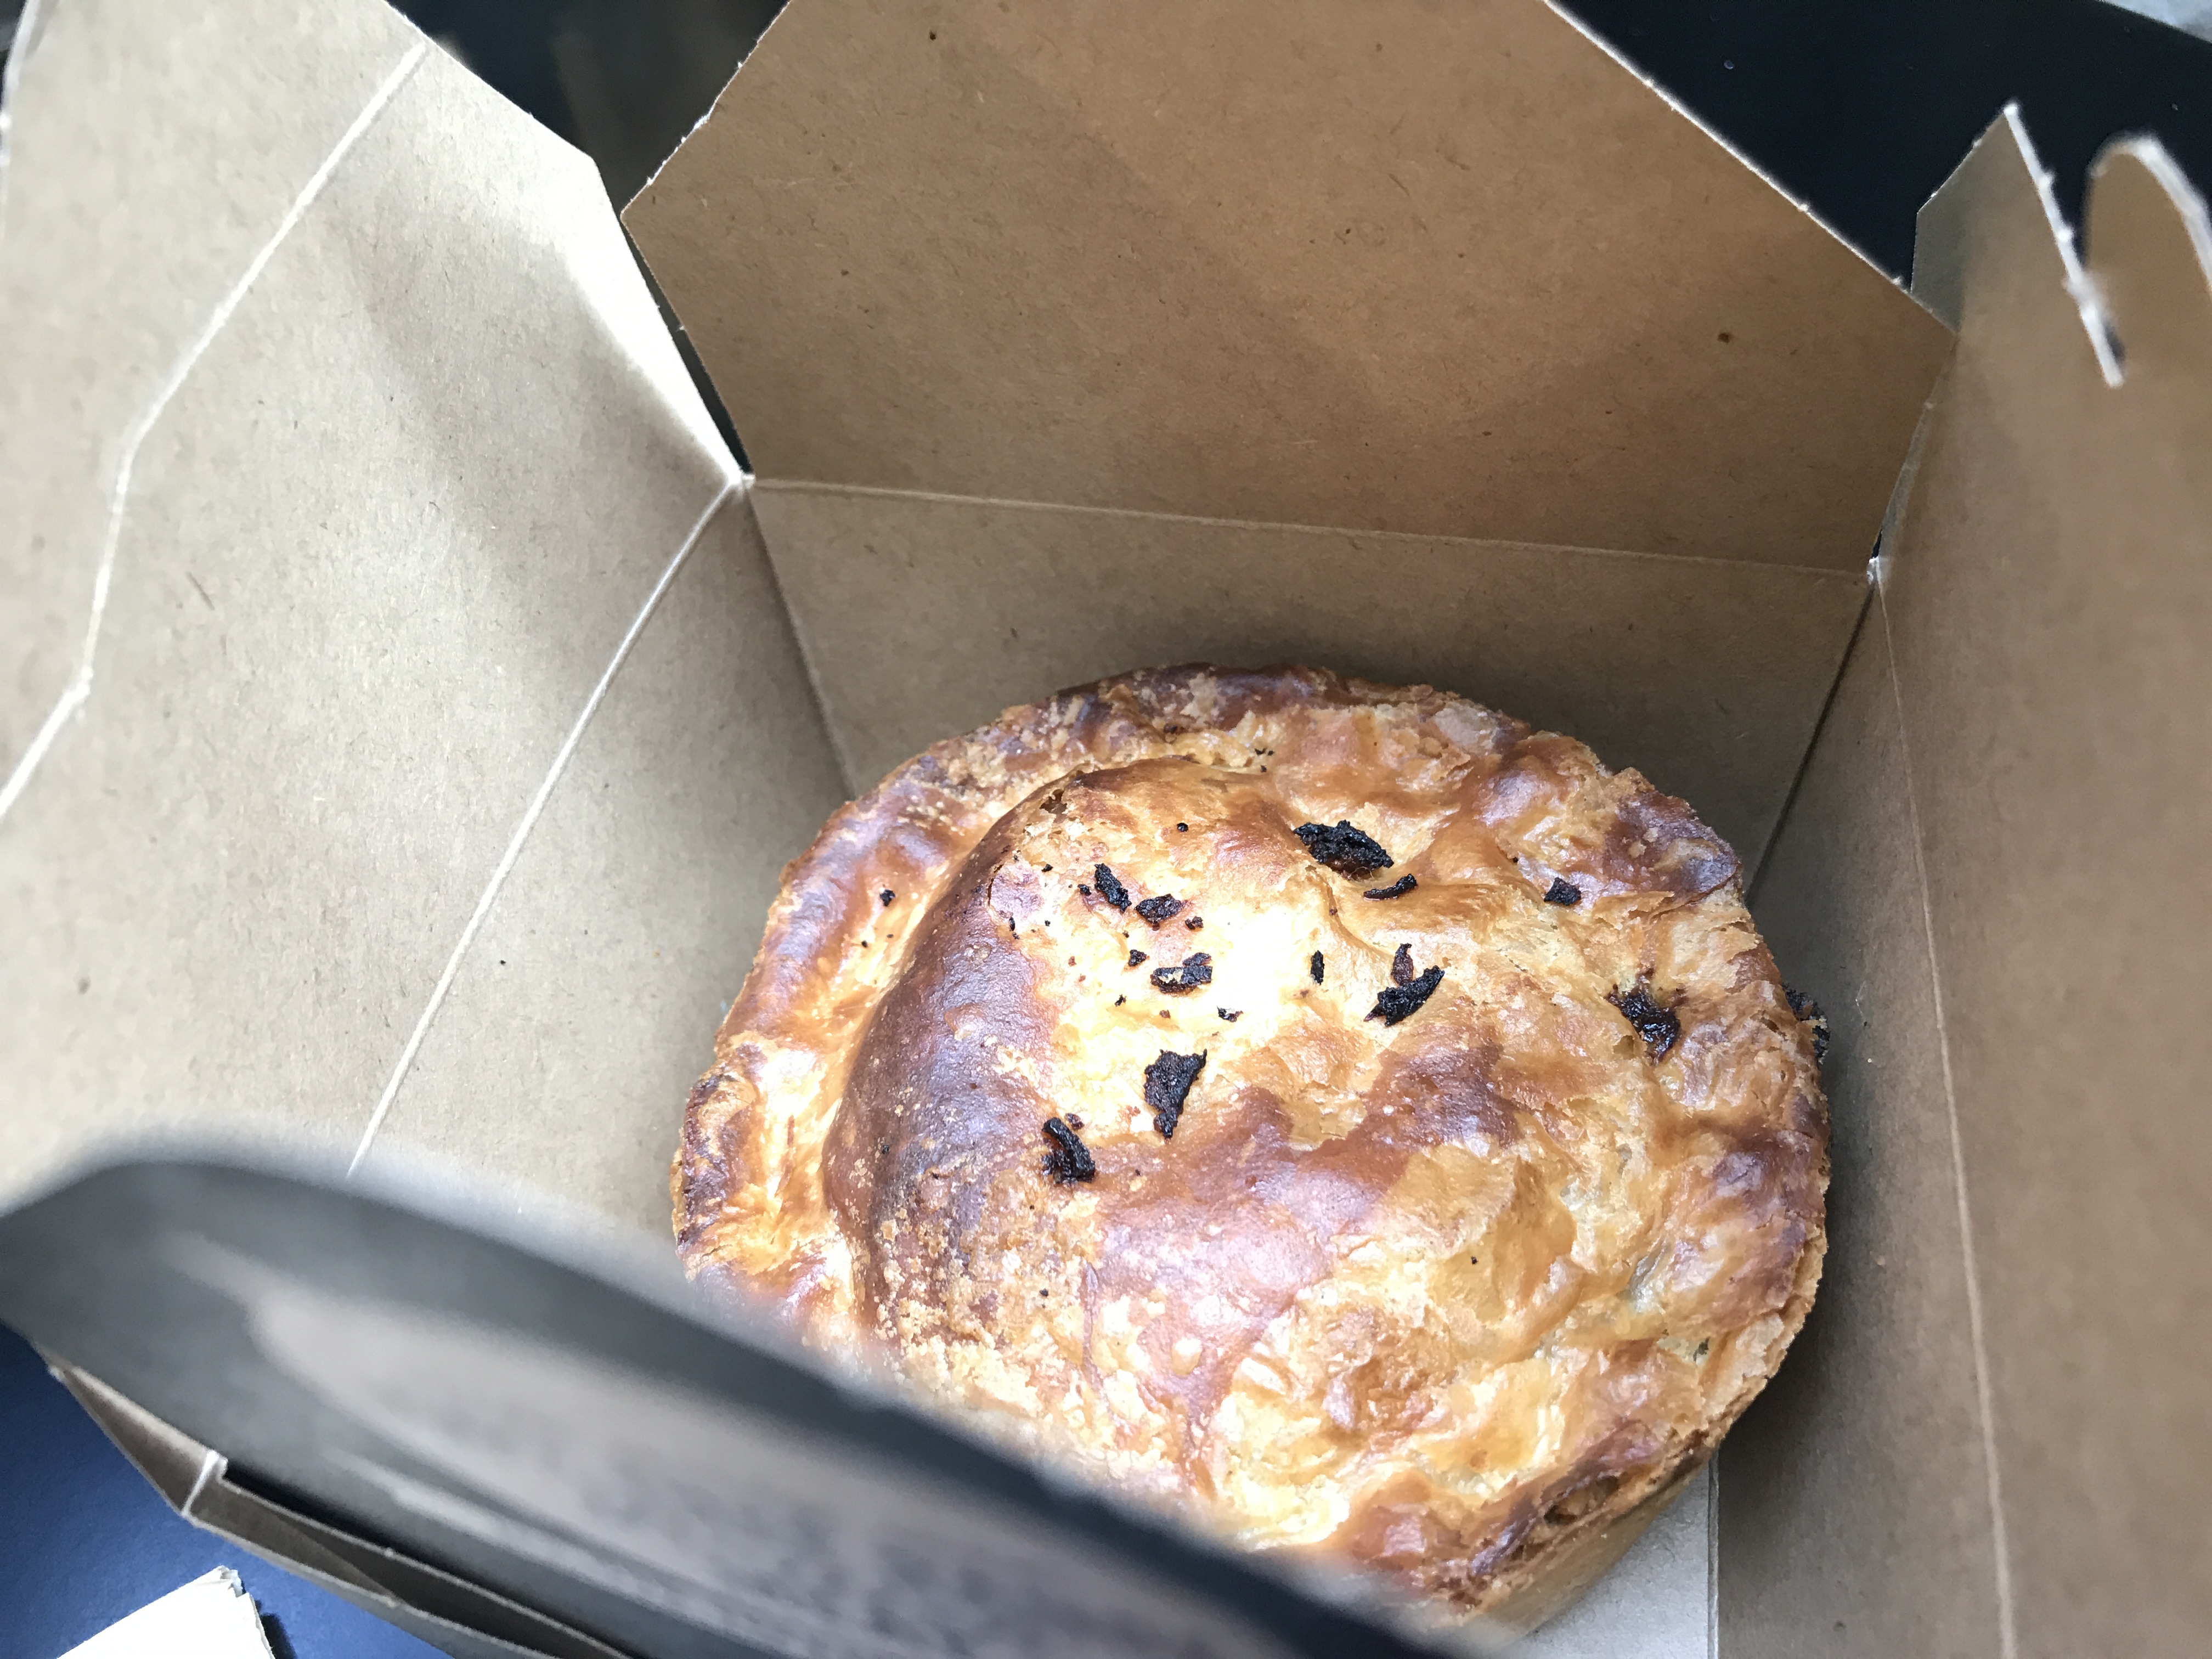 This pie was SO good! I should have taken a photo of the inside too.